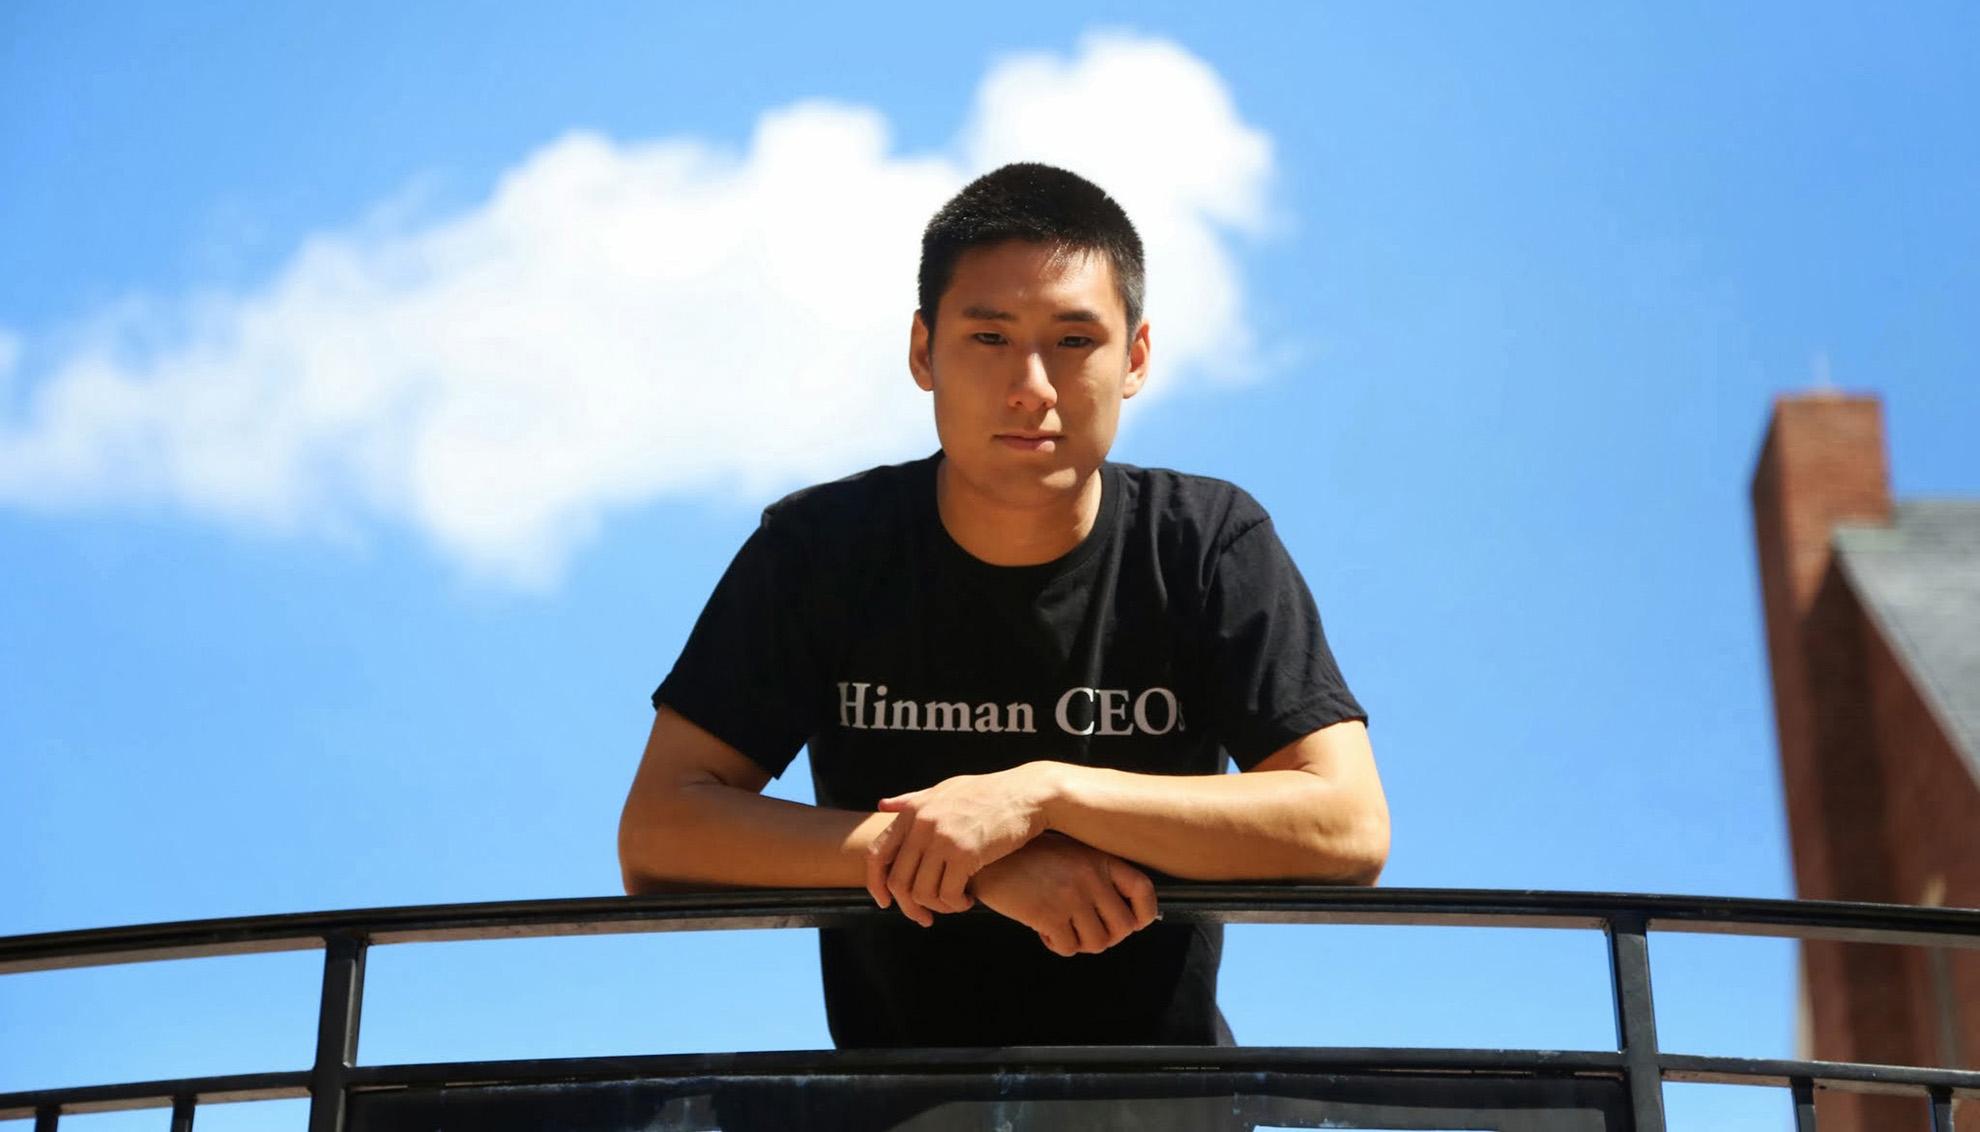 FiscalNote co-founder Jonathan Chen